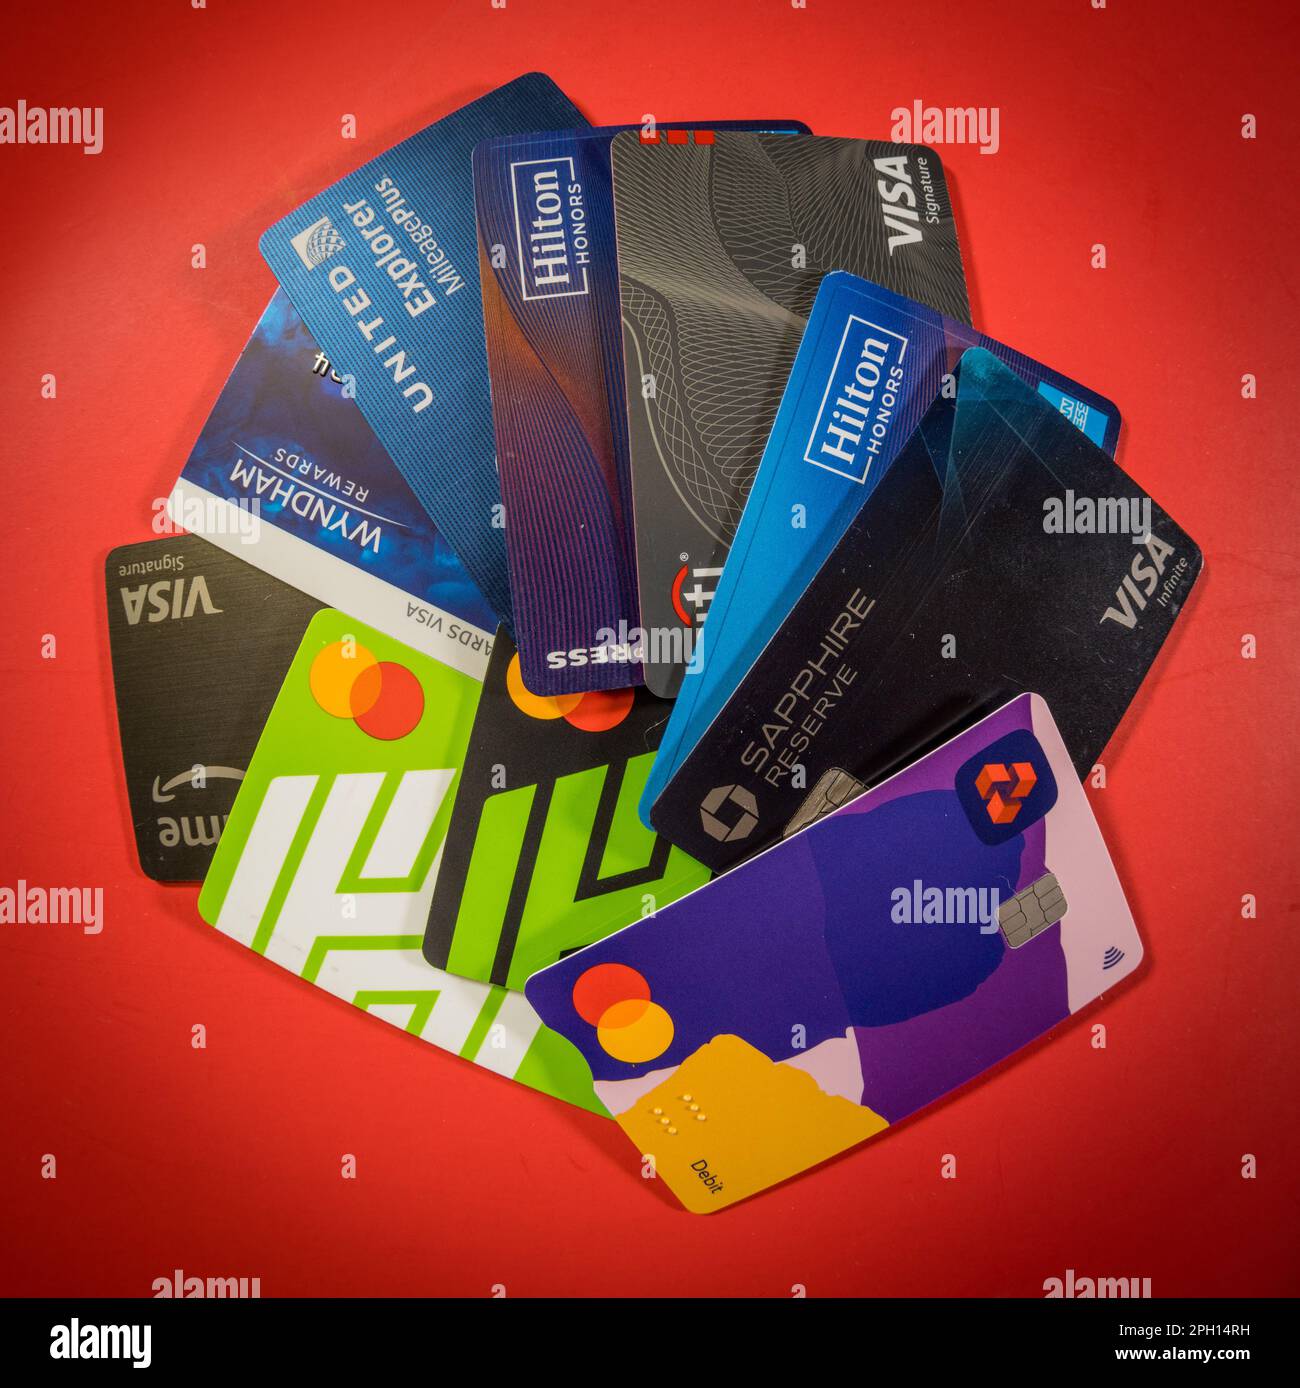 Morgantown, WV -19 March 2023: Exaggerated stack of credit cards to illustrate debt and overspending Stock Photo